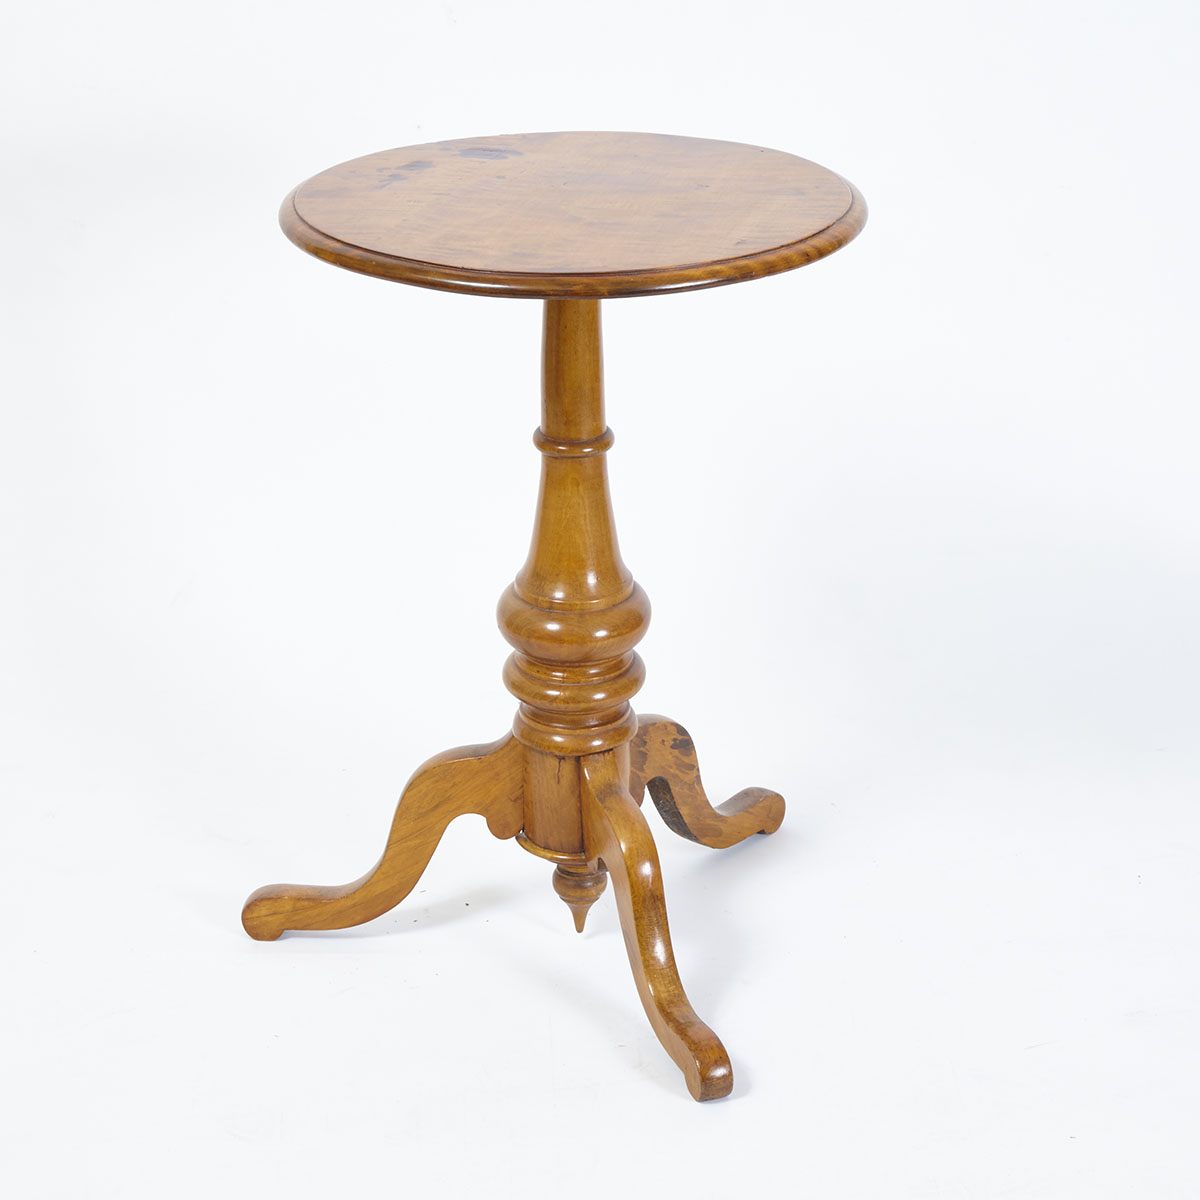 Ontario Flame Maple Lamp Table, mid 19th century